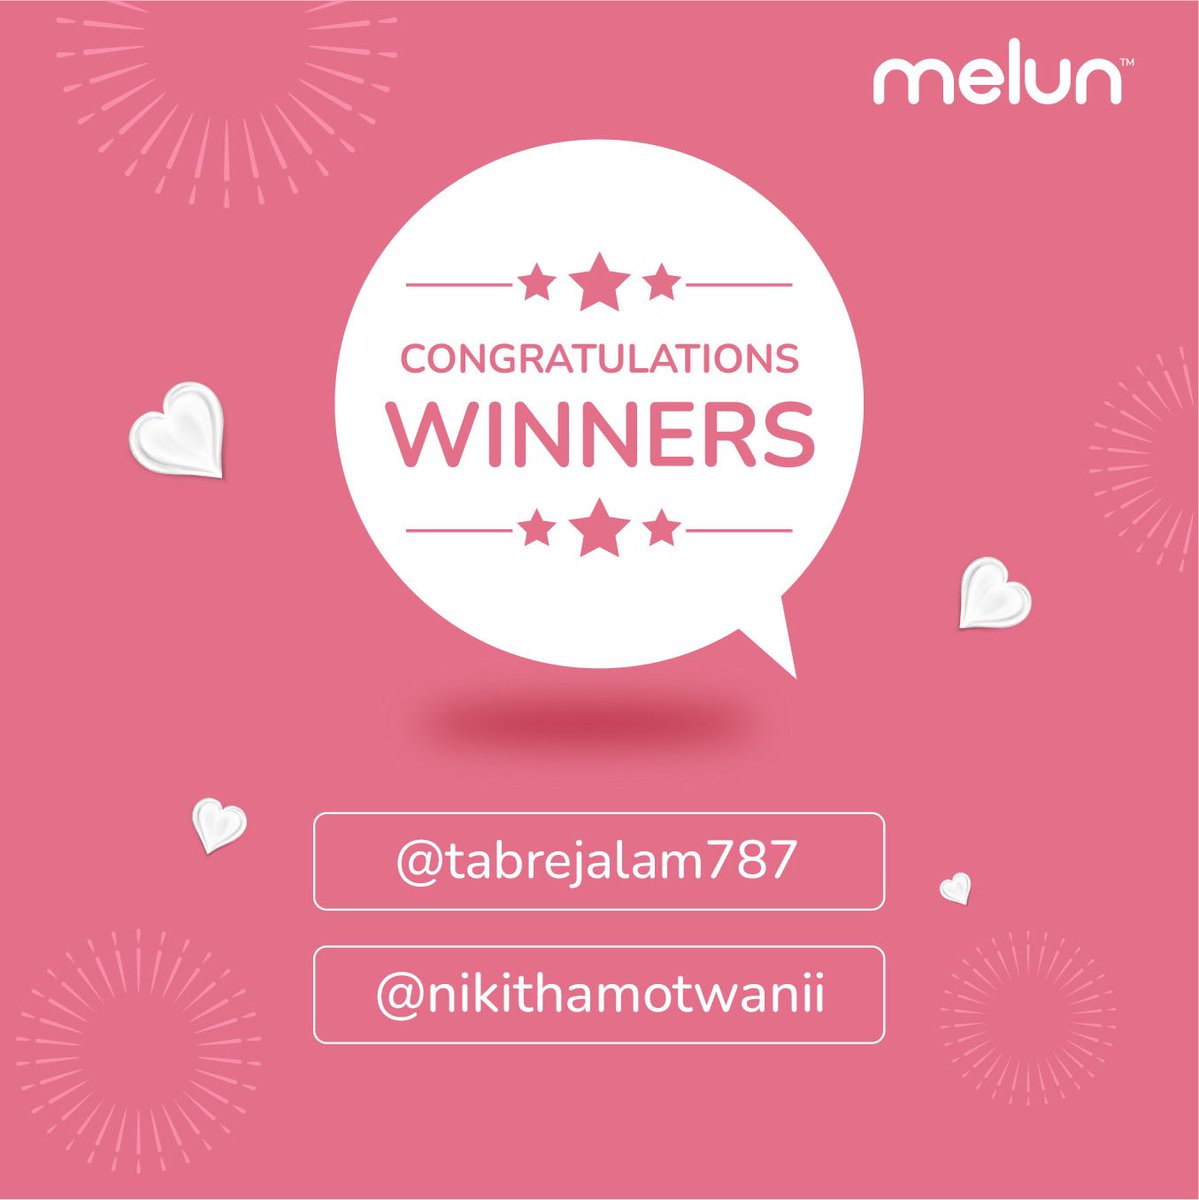 Drumroll, please! 
Our Mother’s Day Special Contest Winners are here. Congratulations on winning this! 😉

#Melun #MothersDaySpecial #MothersDay #MothersDayContest #ContestWinners #ContestParticipation #Skincare #SkincareAddict #SkincareJunkie #Sunscreen #Moisturizer #India